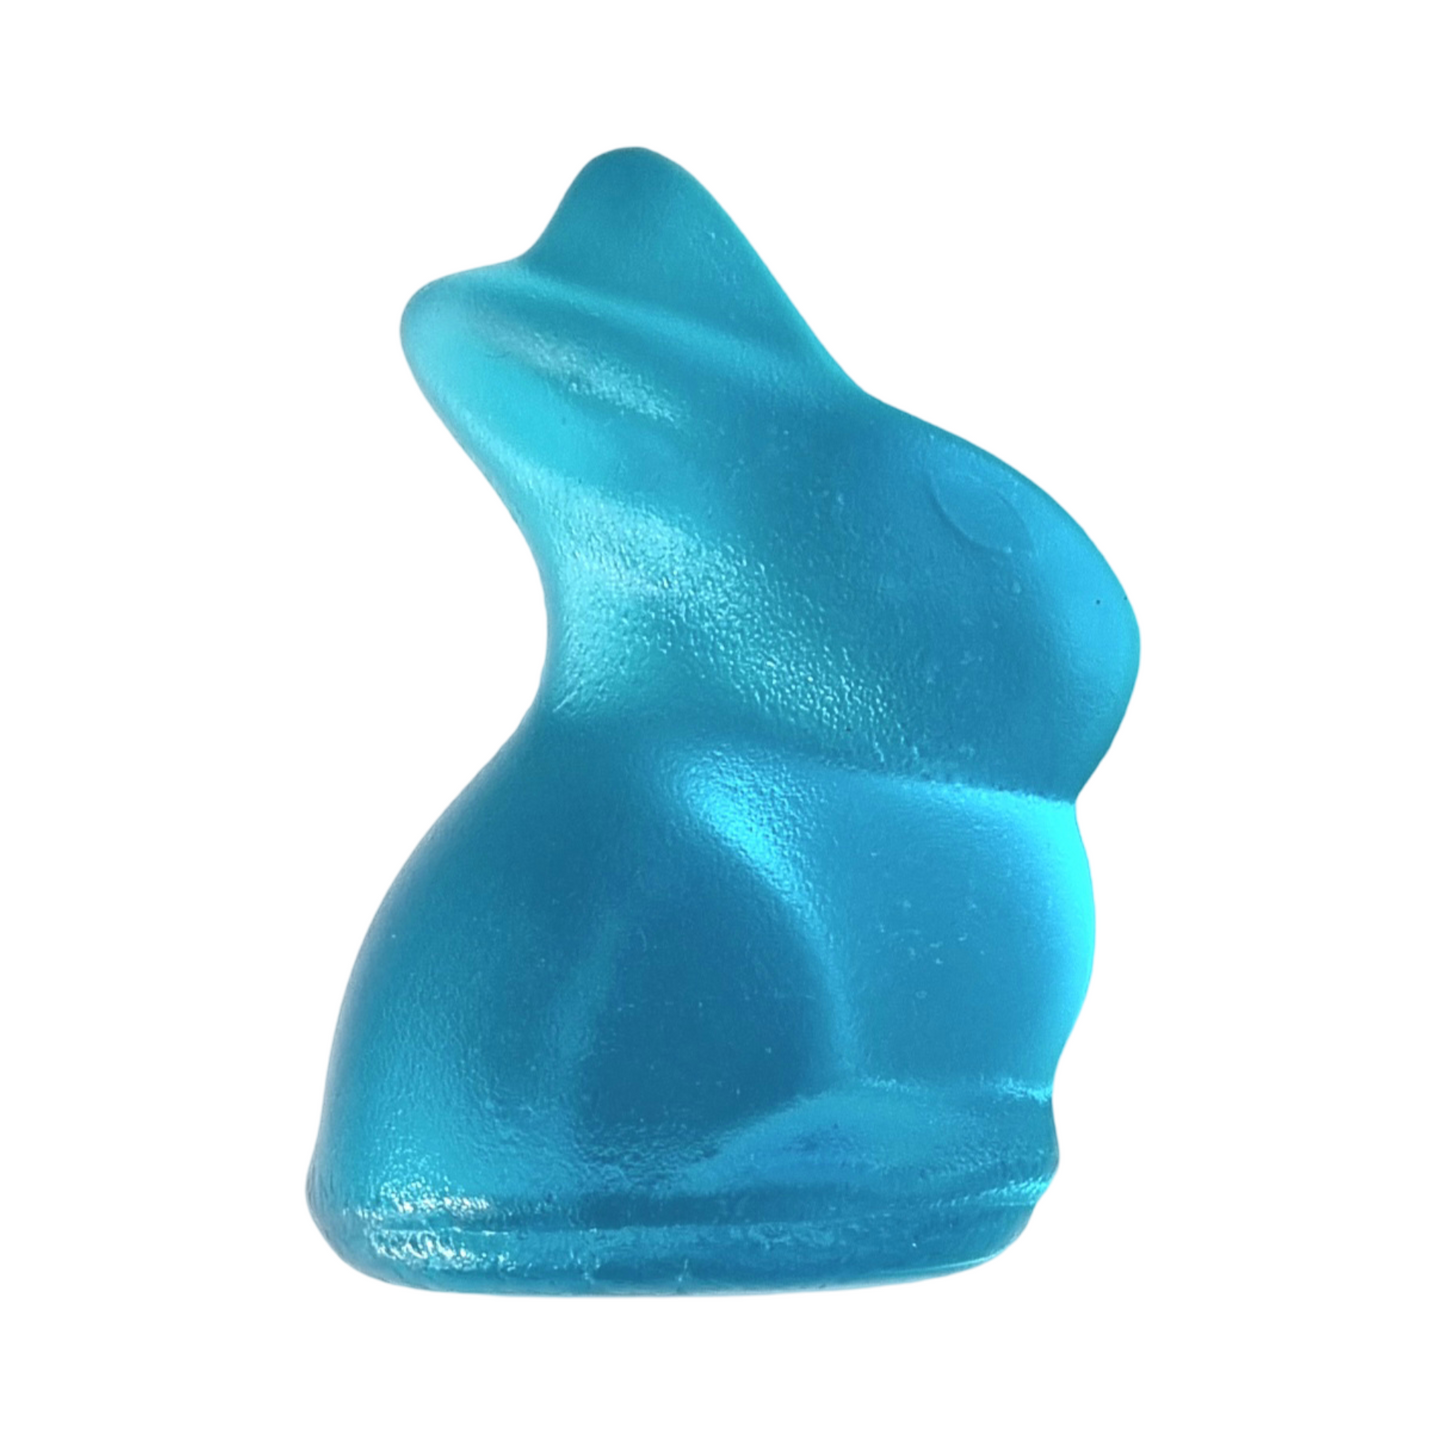 Exciting coloured cast glass bunnies